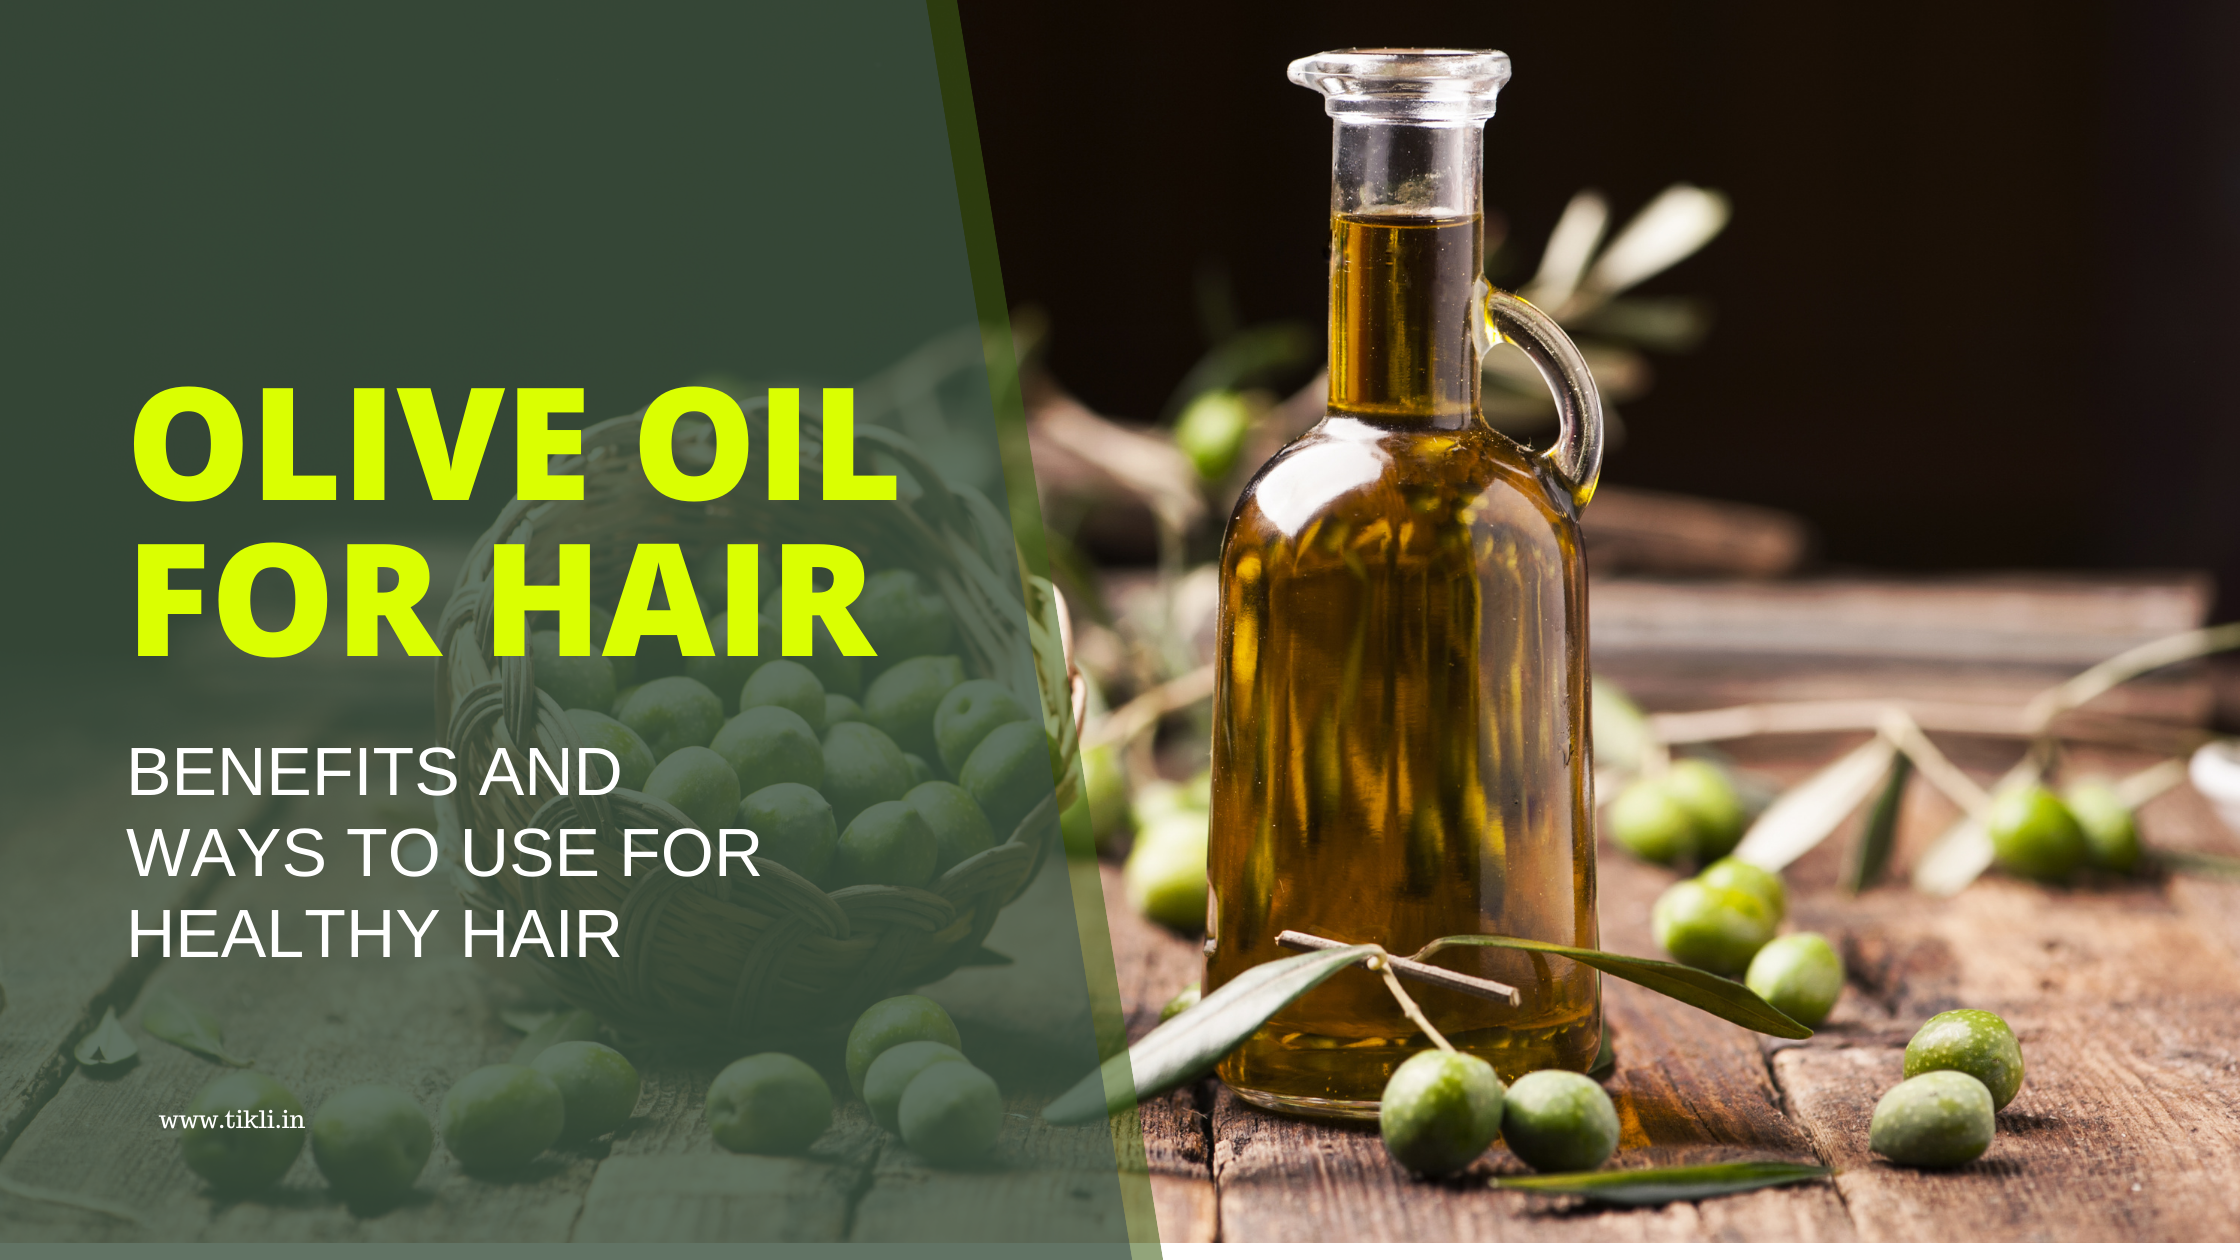 Olive oil for hair care How to use and possible benefits